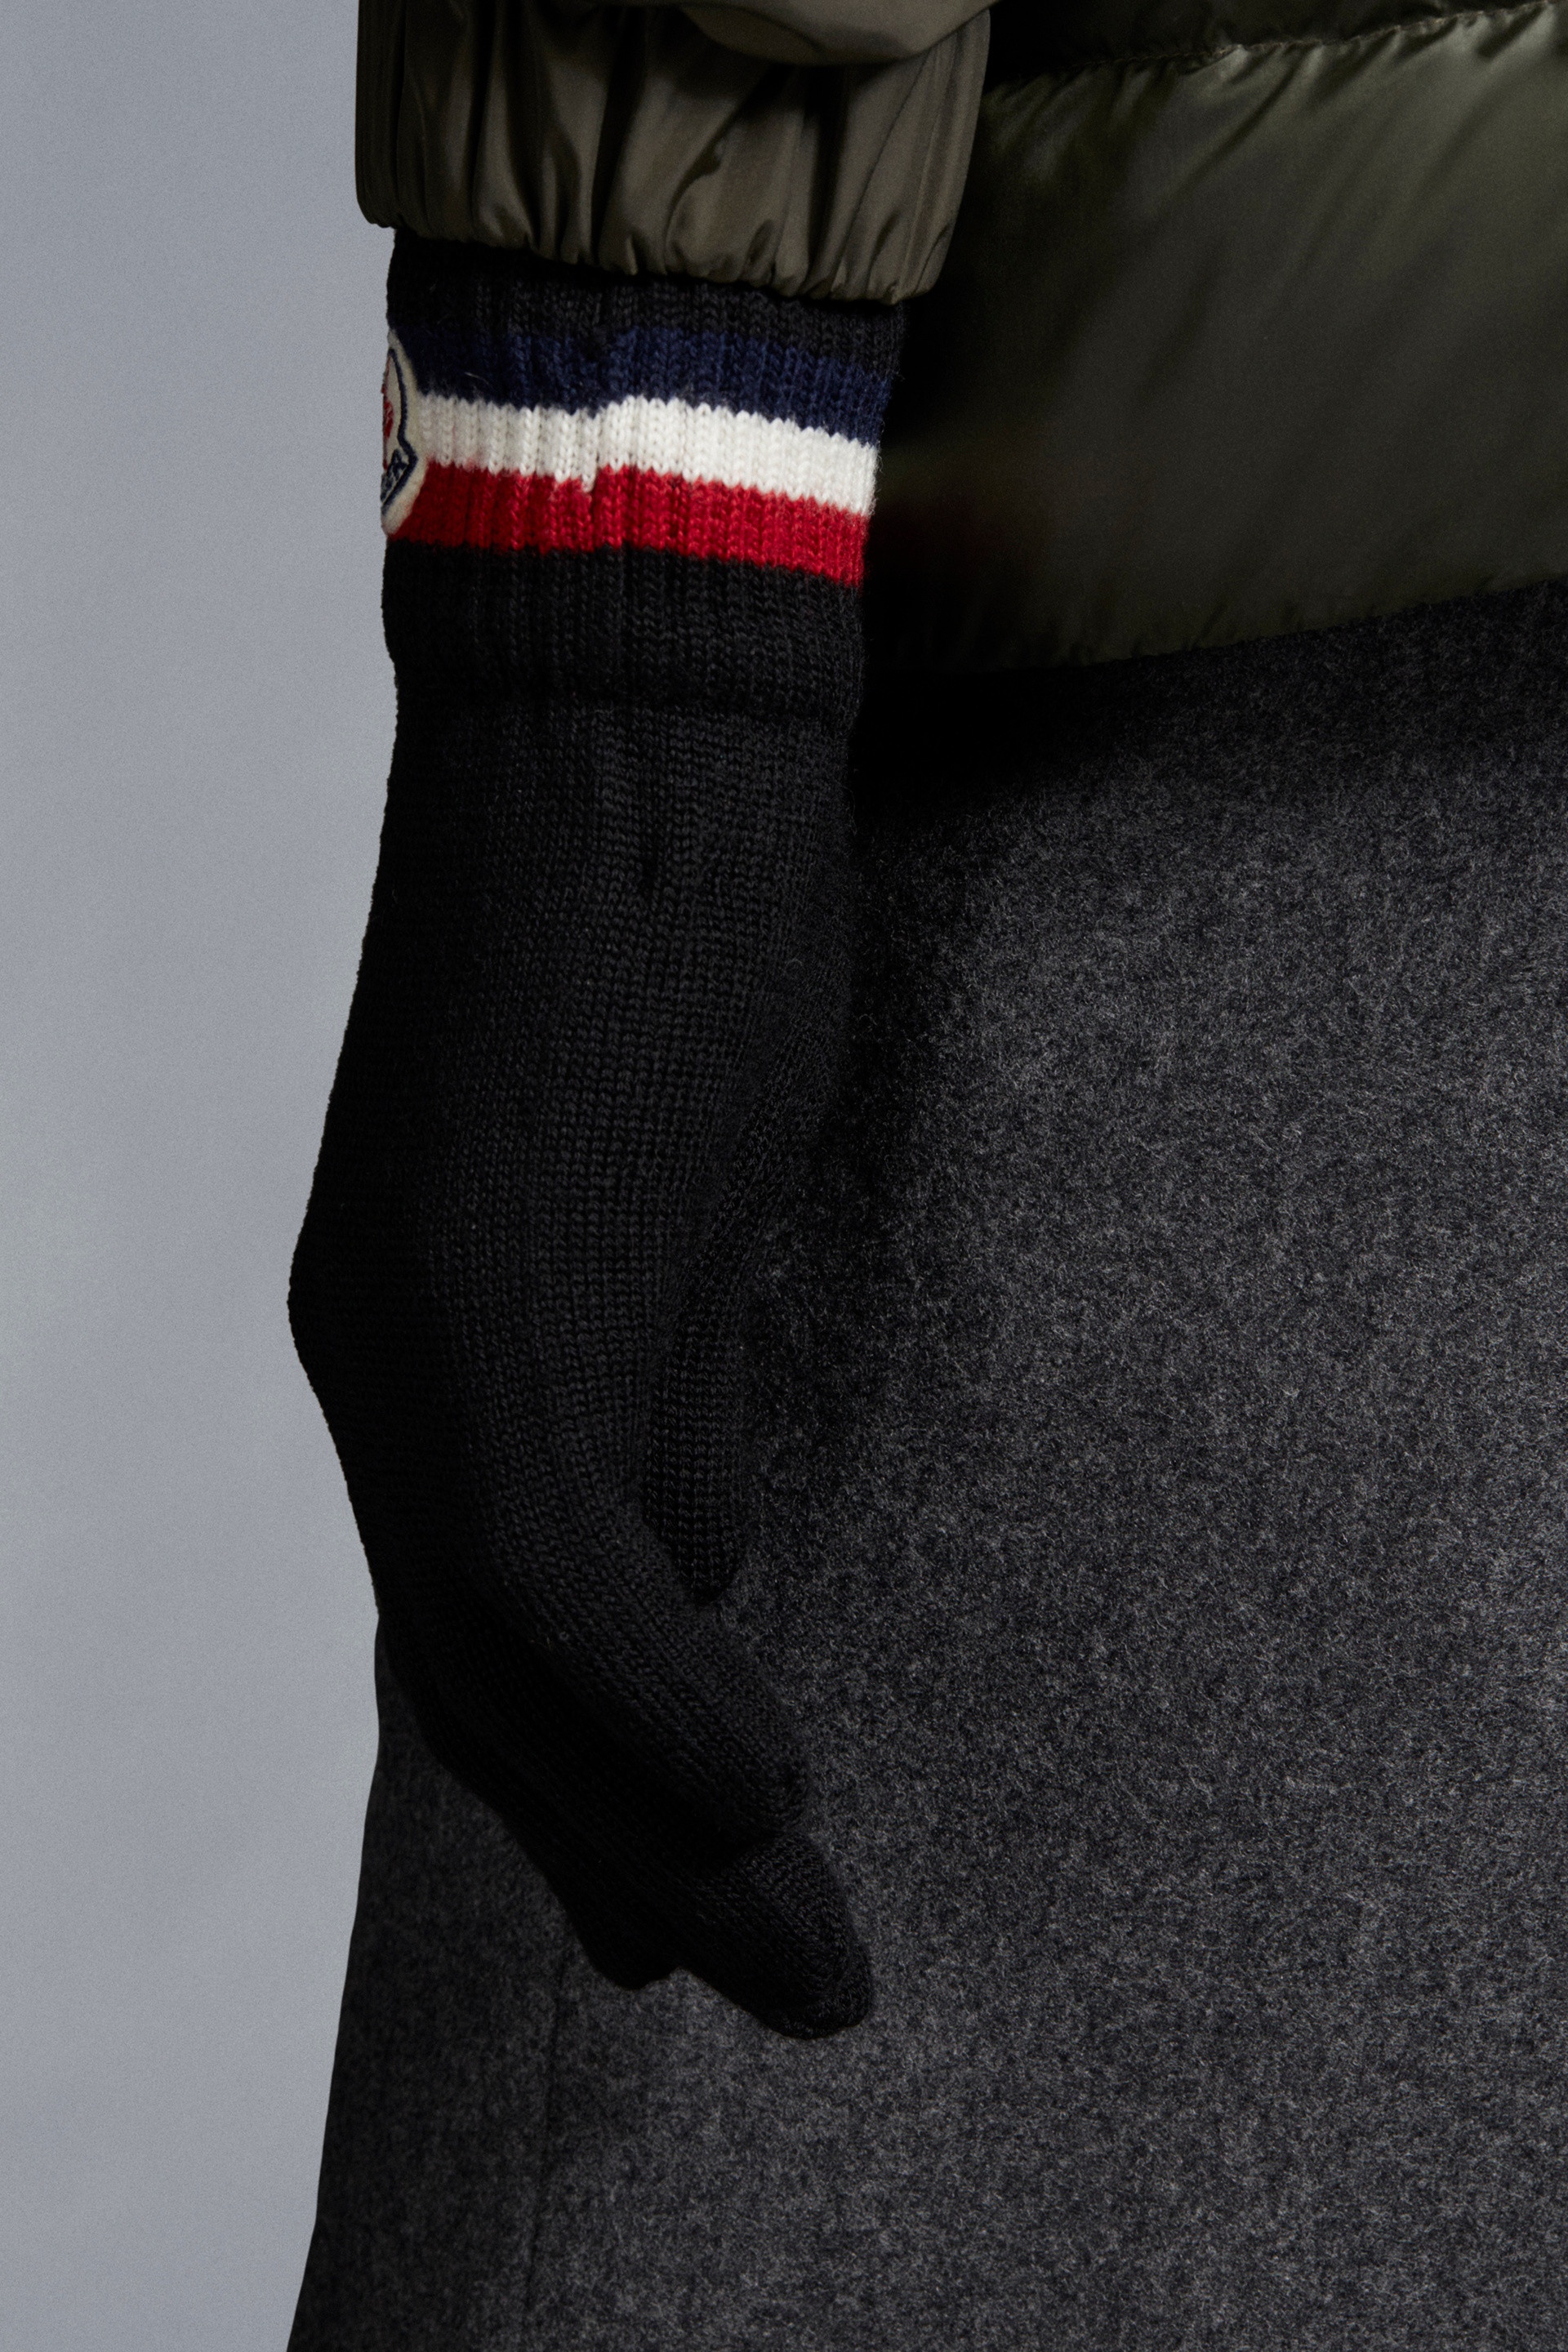 Tricolor Wool Gloves - 4